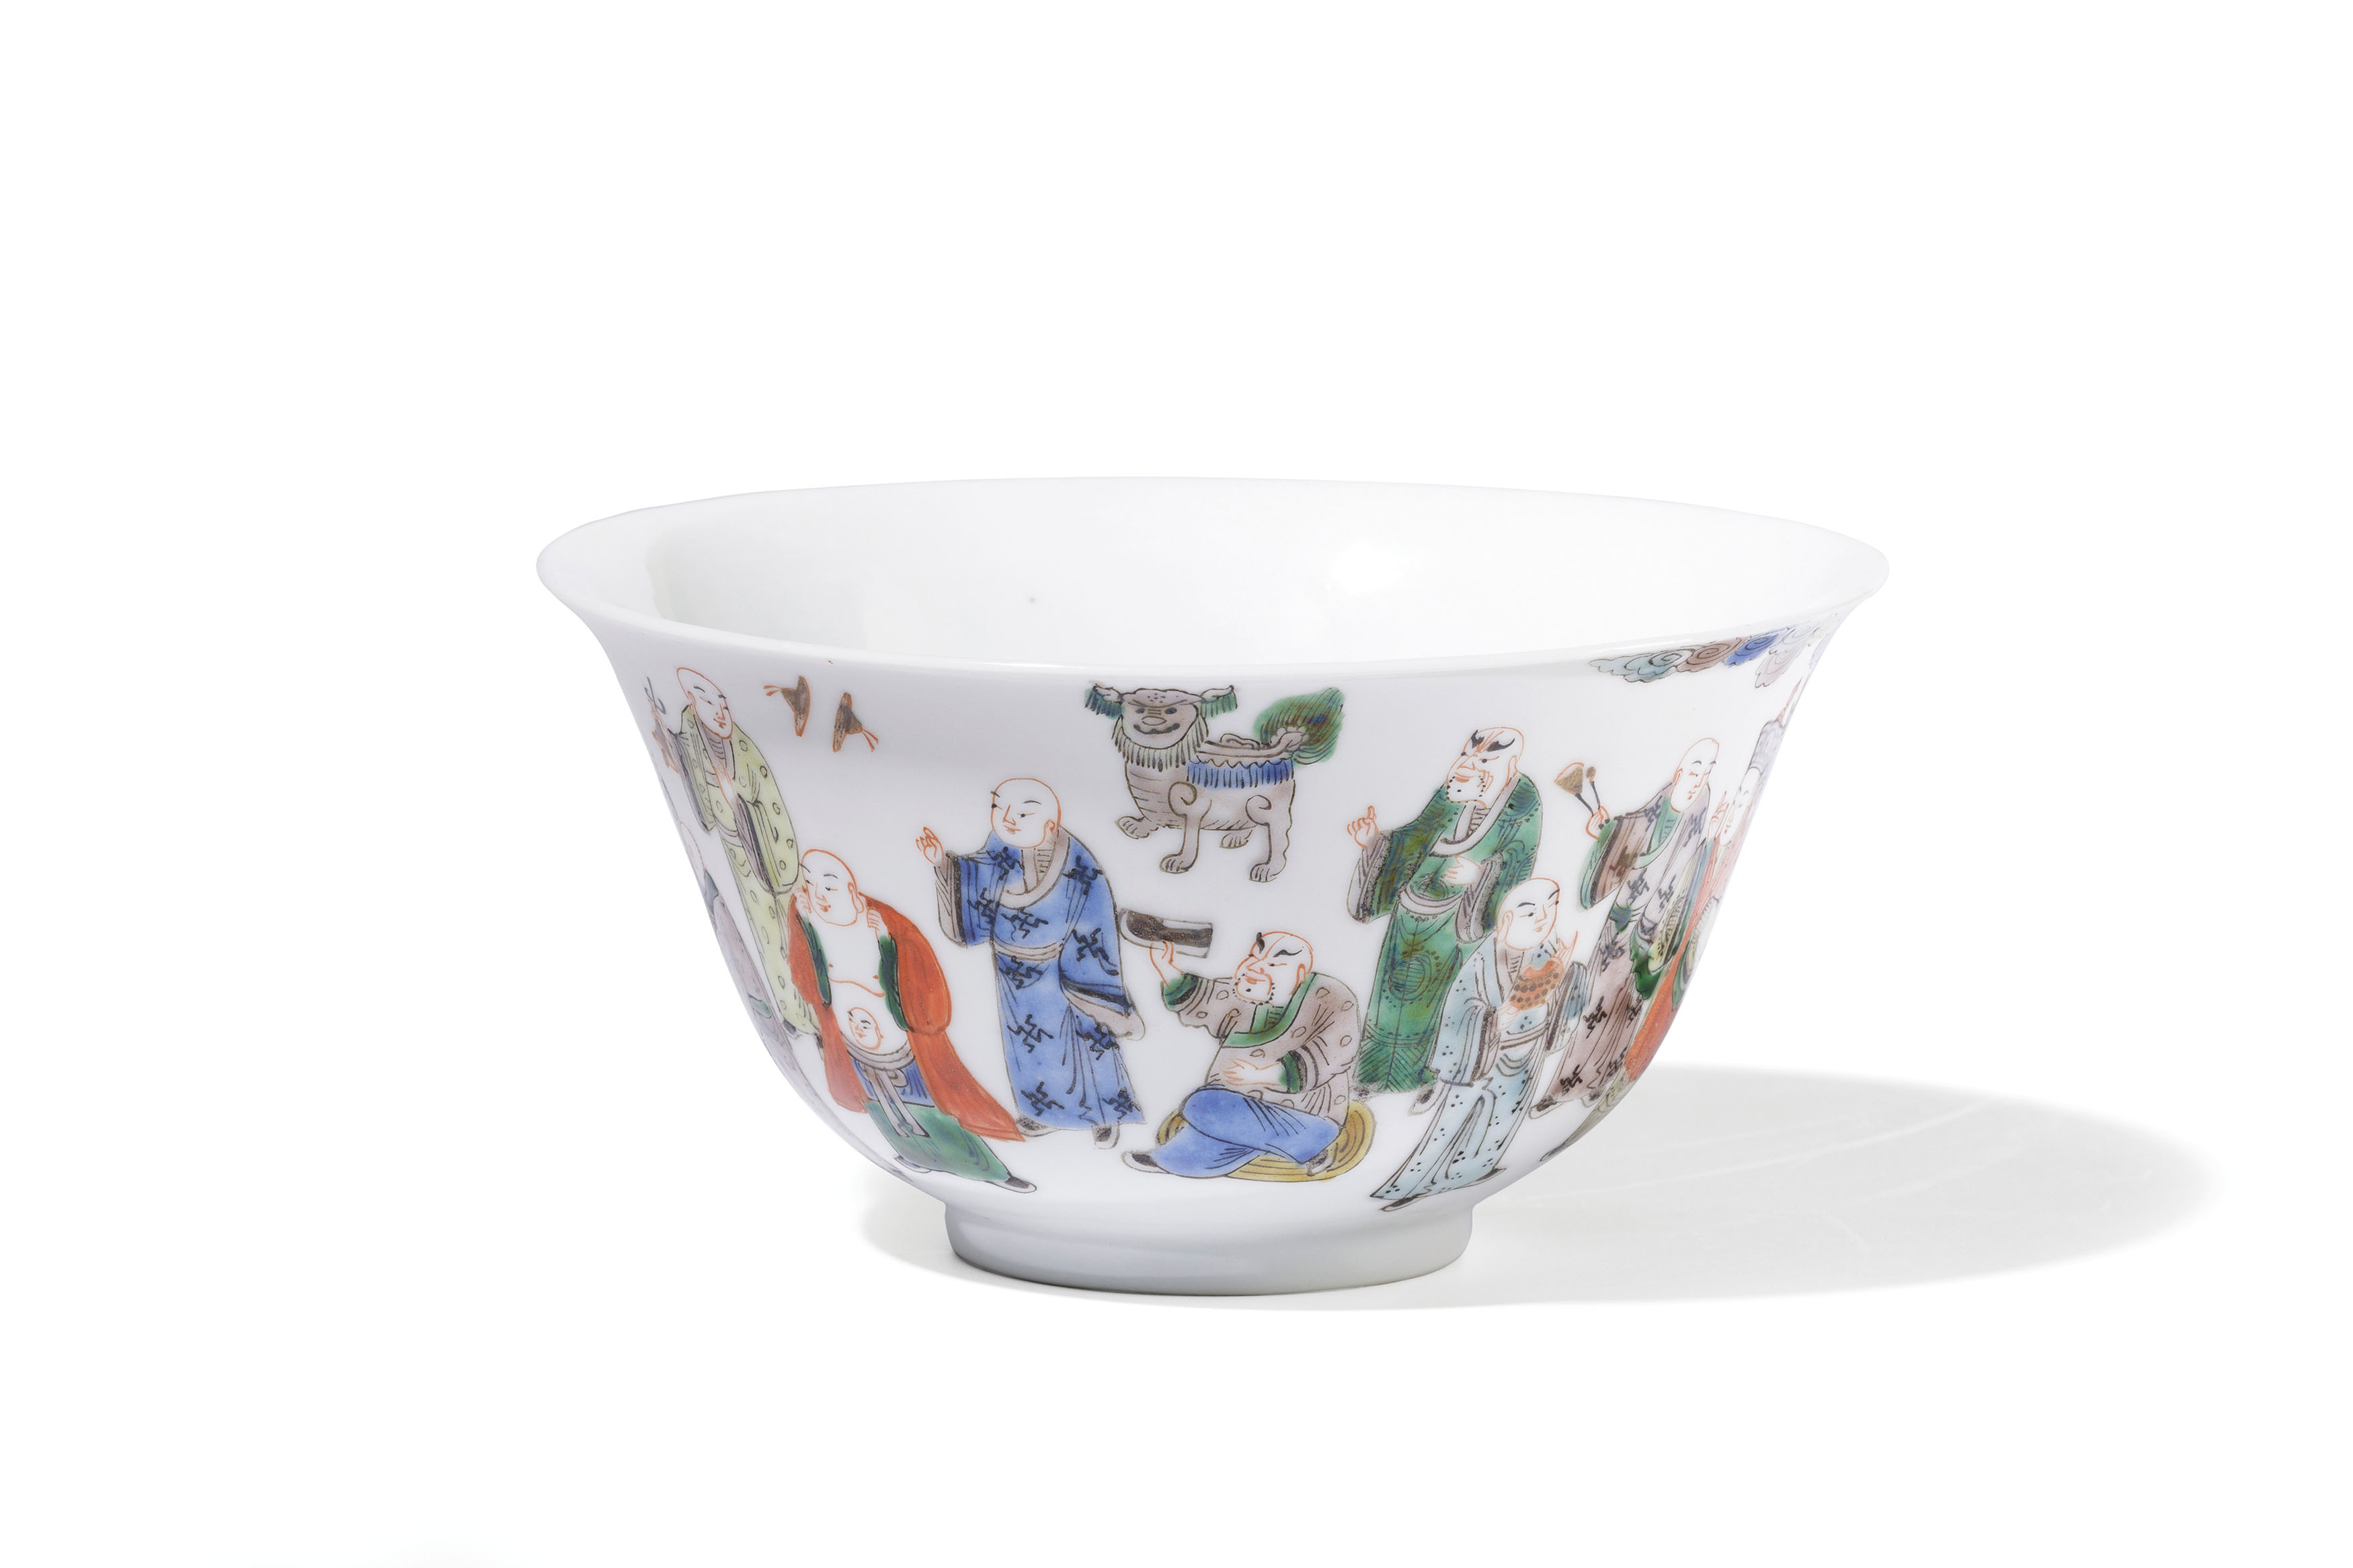 A FAMILLE VERTE PORCELAIN BOWL, CHINA, 19TH CENTURY, FOUR CHARACTER MARK AT THE BASE - Image 3 of 5